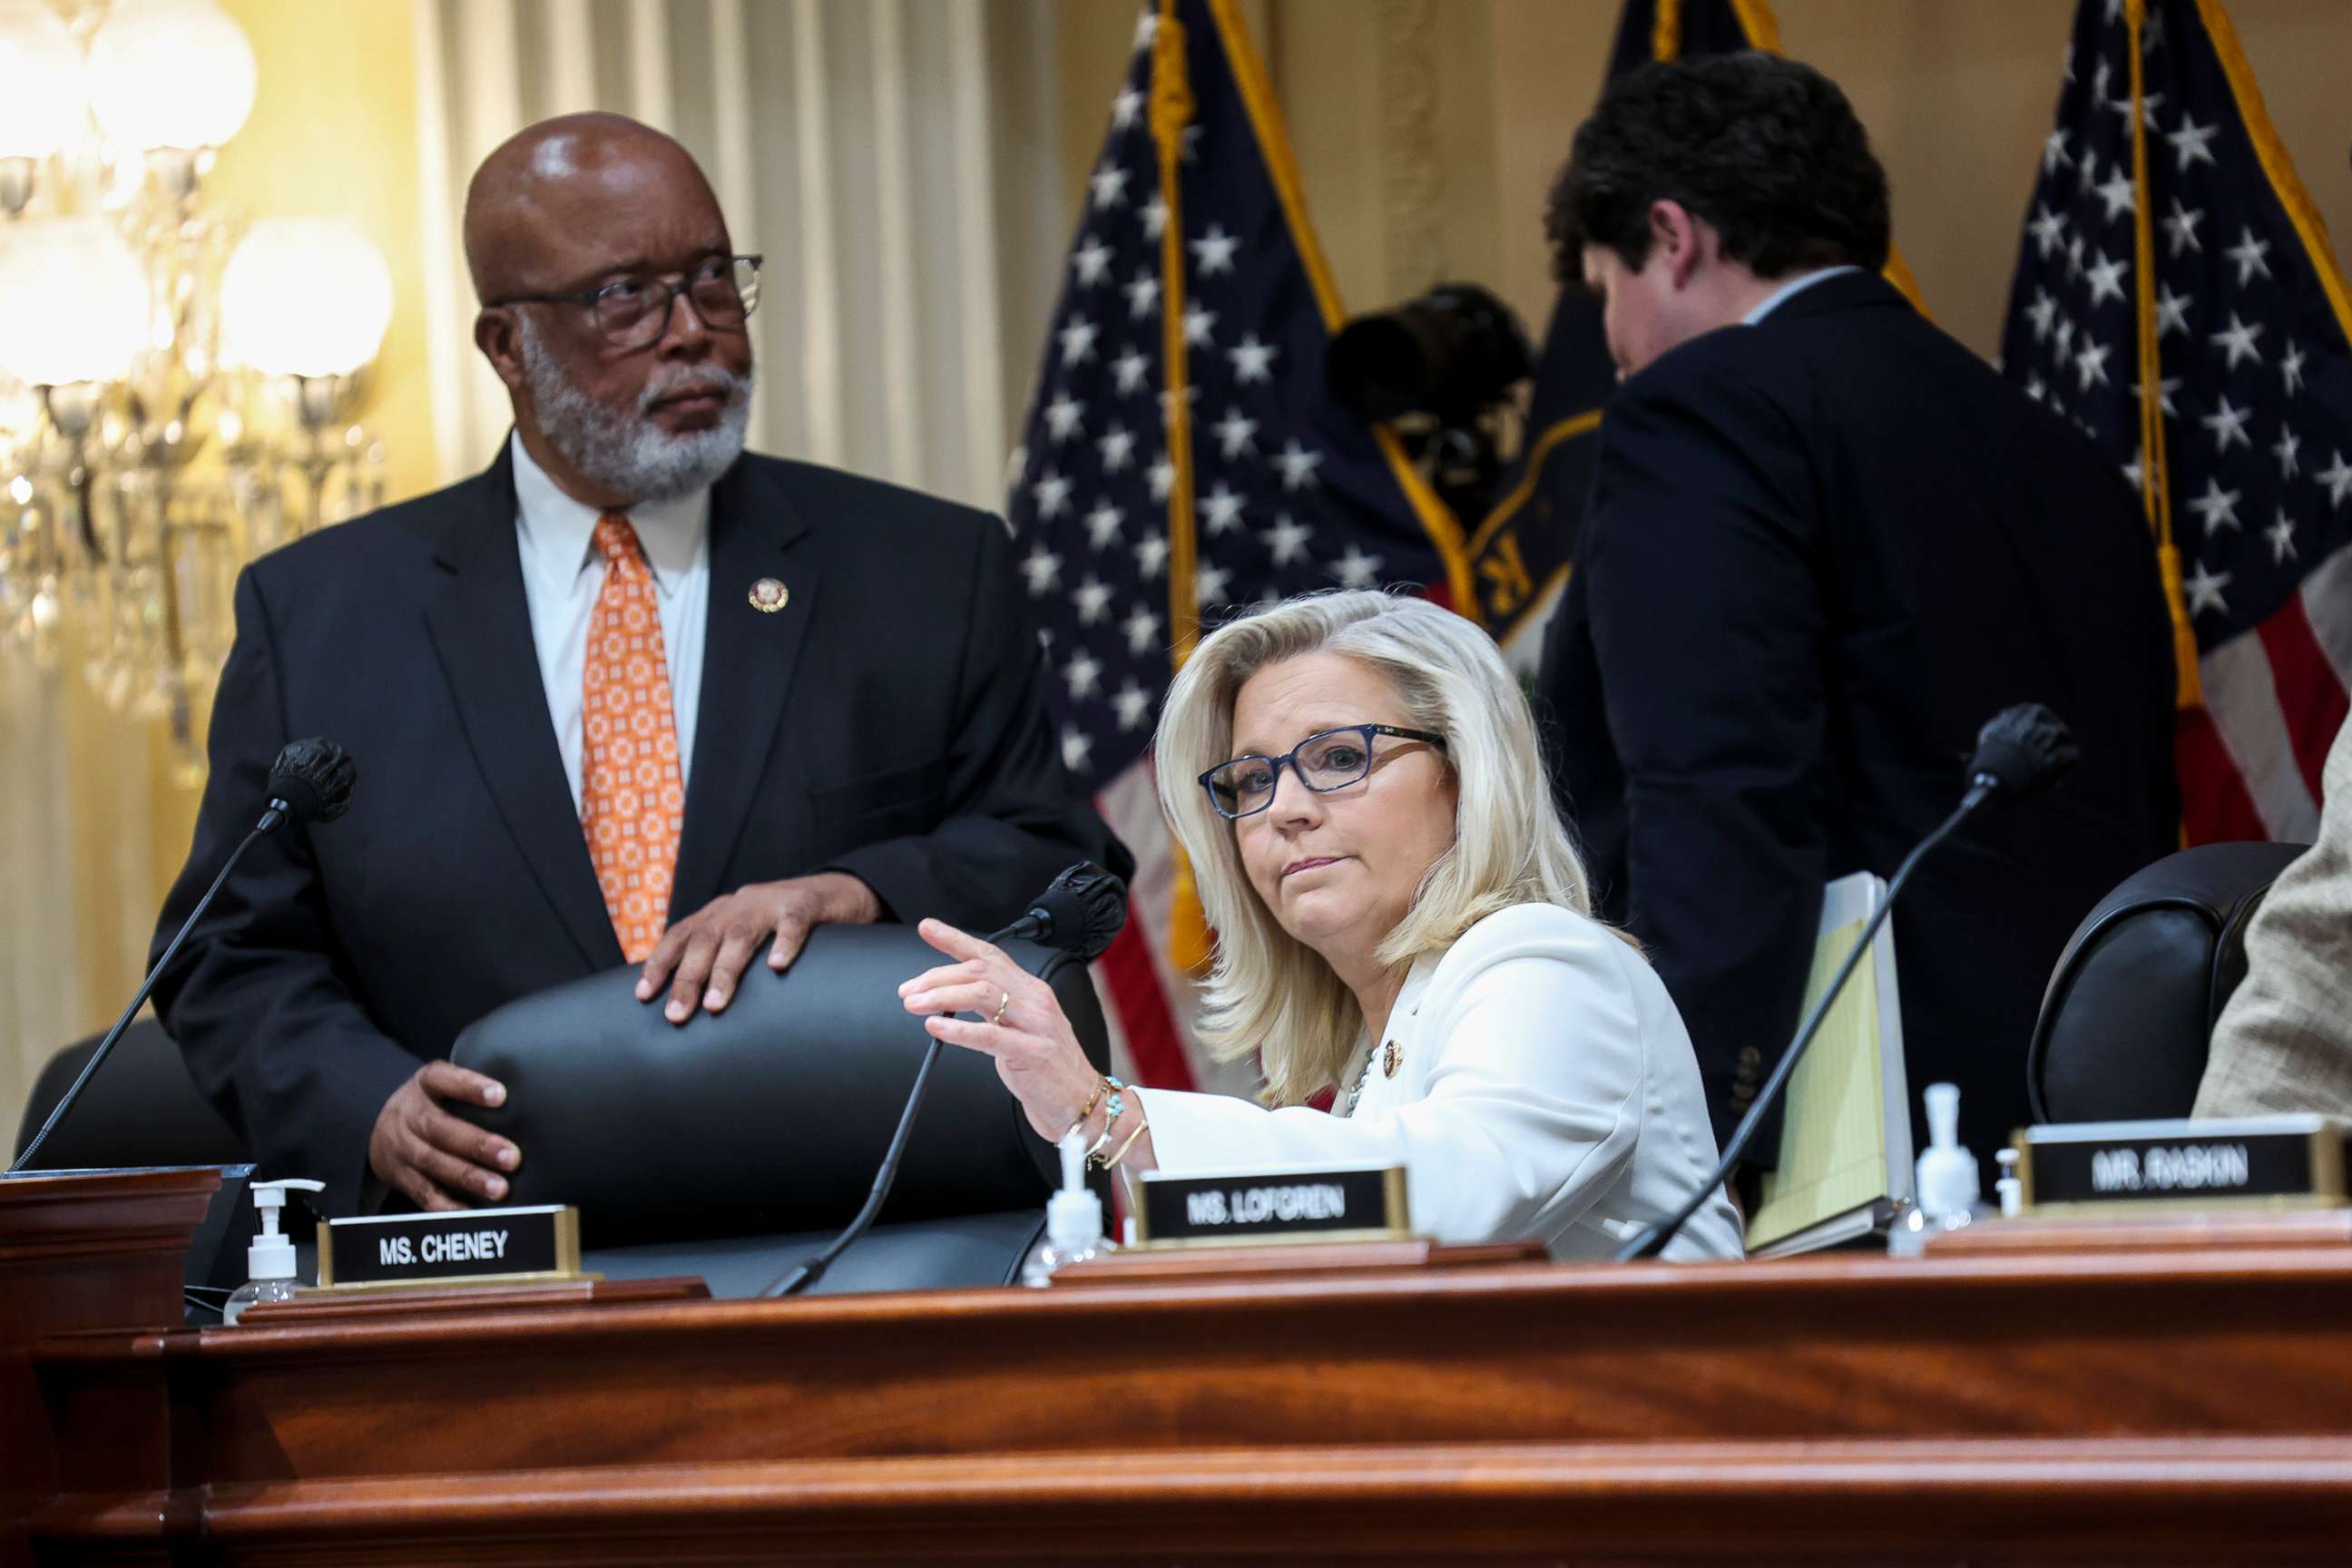 PHOTO: Rep. Liz Cheney attends the hearing on the January 6th investigation in the Cannon House Office Building in Washington, June 23, 2022.